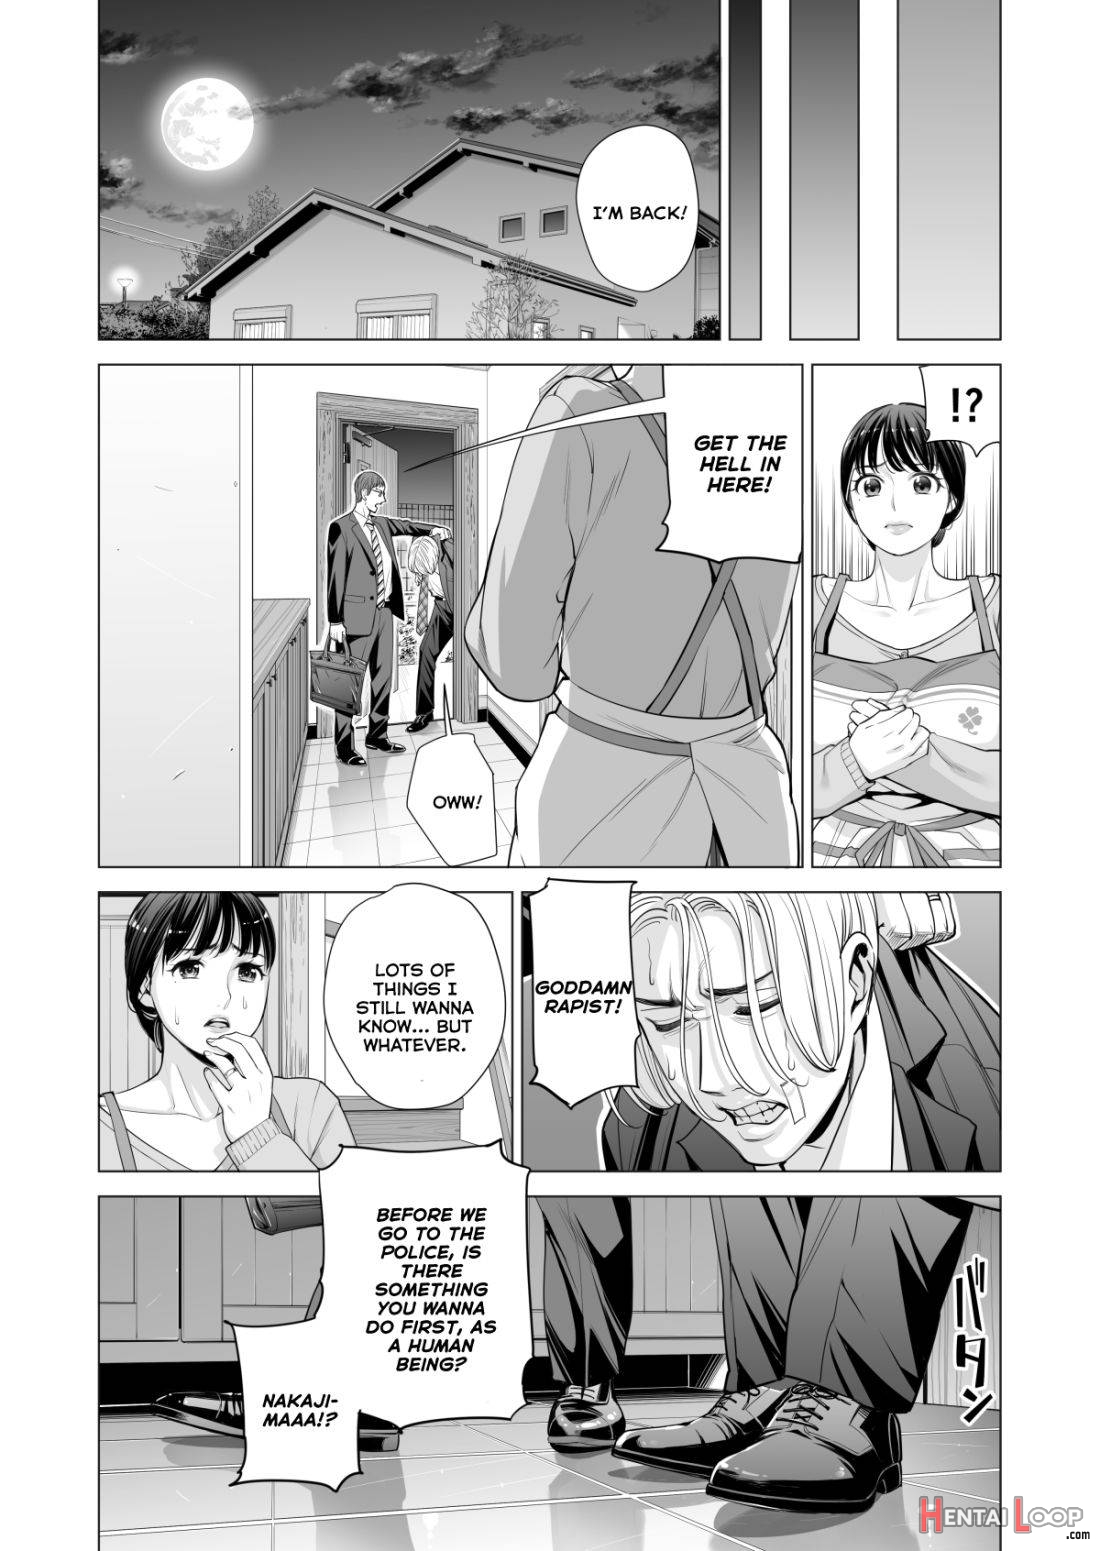 Tsukiyo no Midare Zake (Kouhen) Moonlit Intoxication ~ A Housewife Stolen by a Coworker Besides her Blackout Drunk Husband ~ Chapter 2 page 25